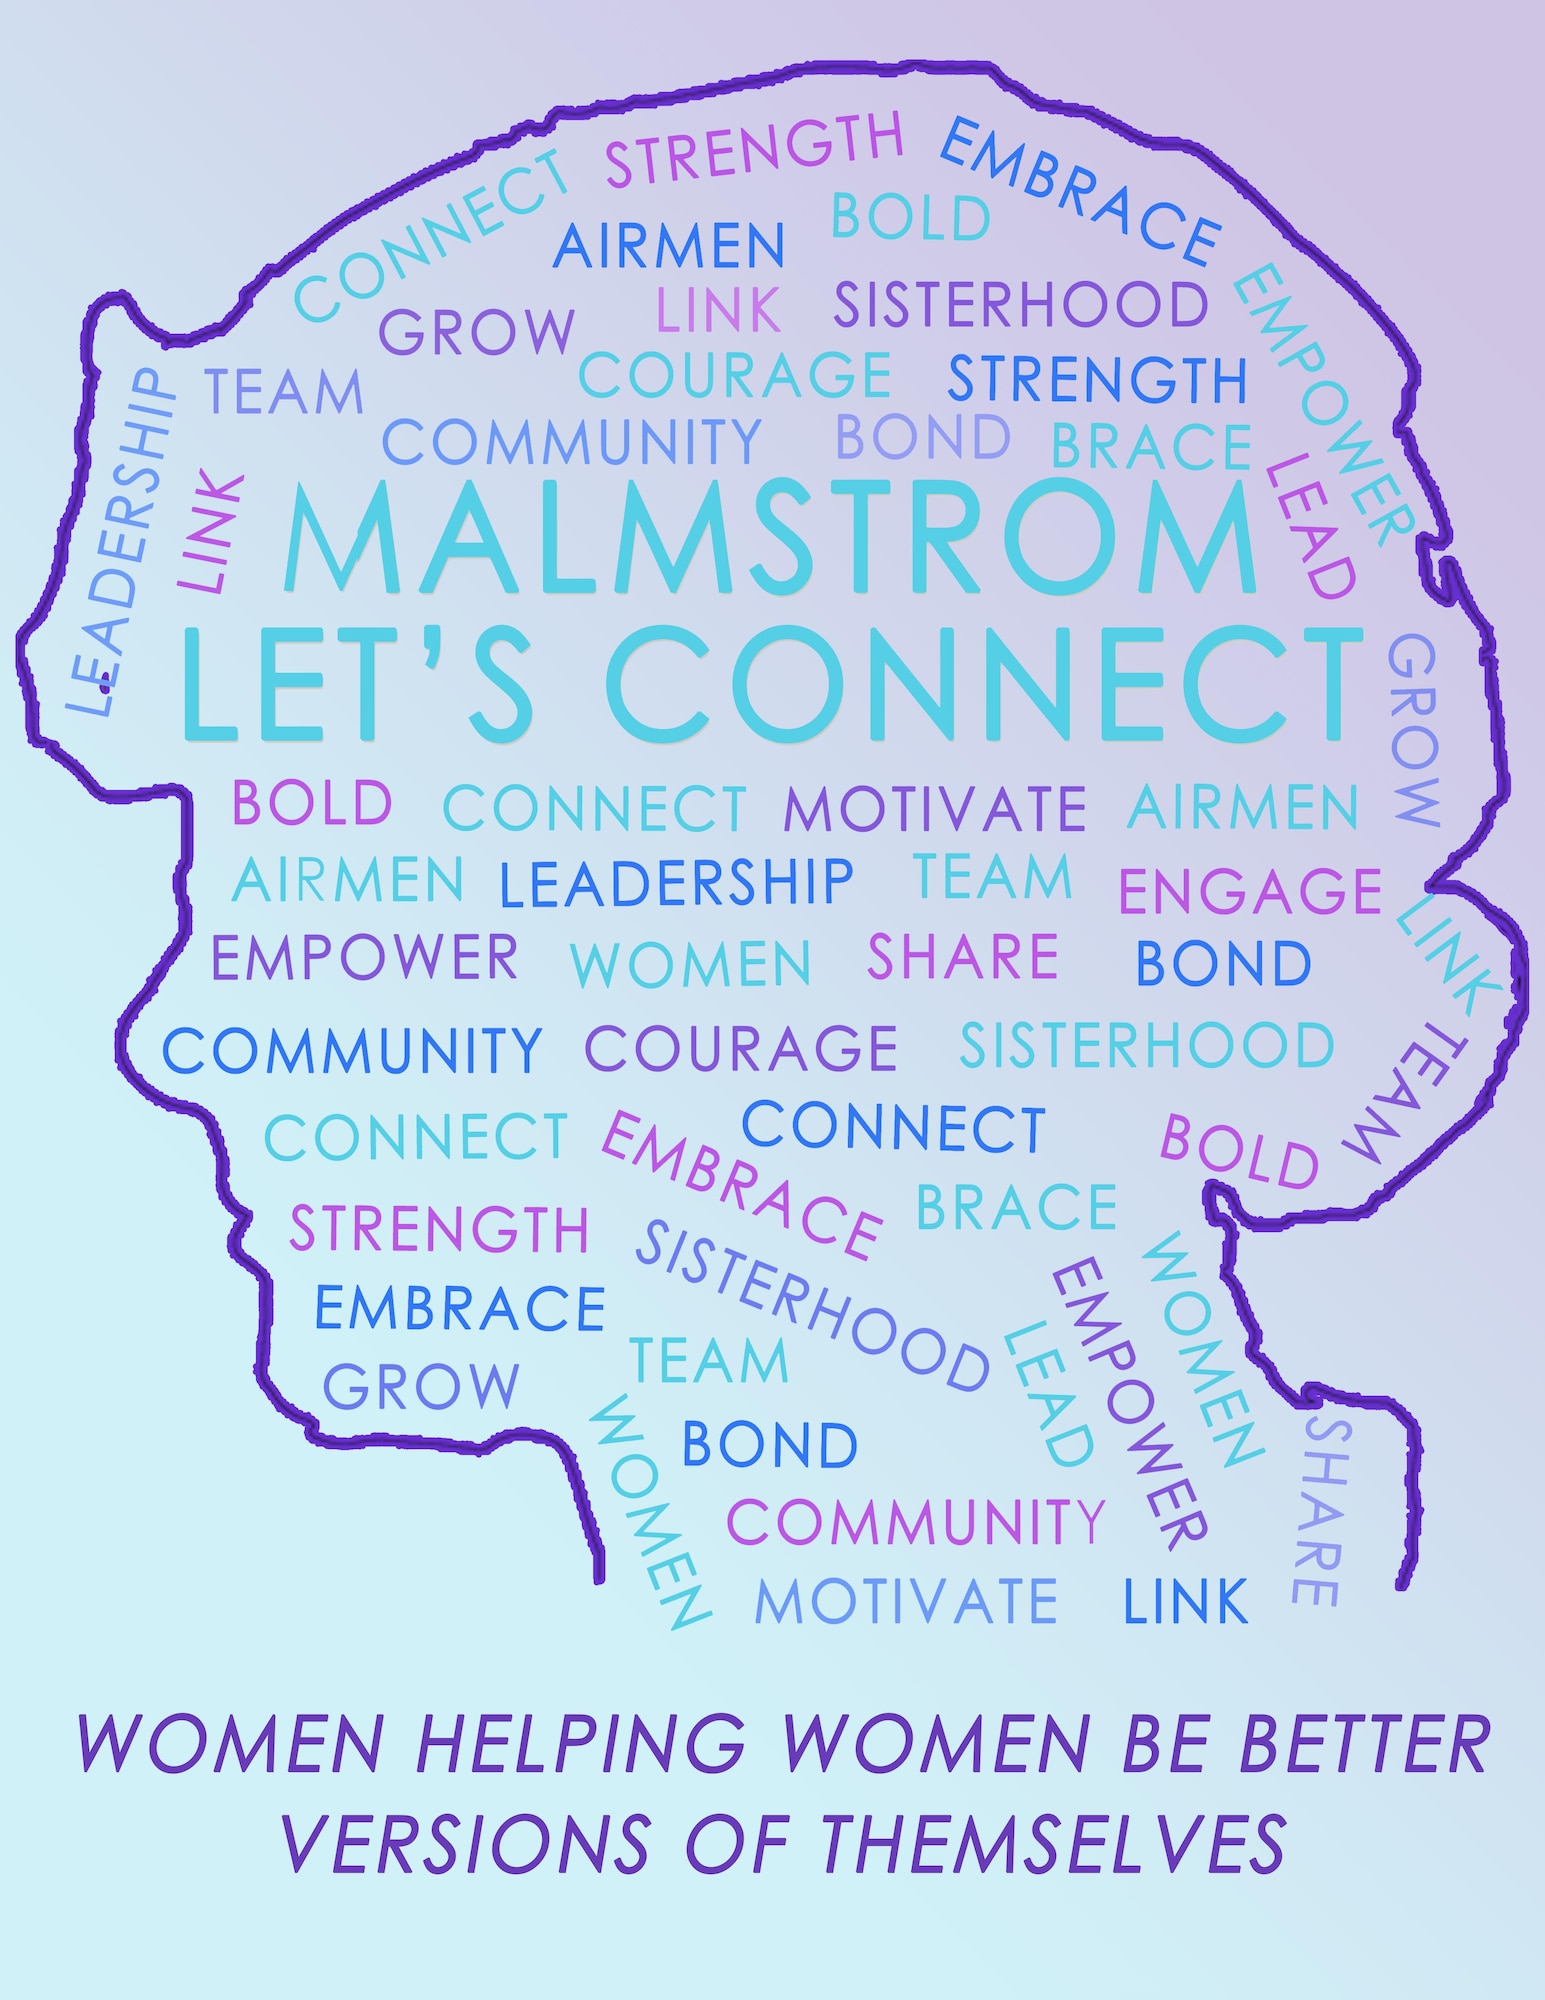 Malmstrom’s “Let’s Connect” graphic. (U.S. Air Force graphic by 2nd Lt. Megan Duenas)